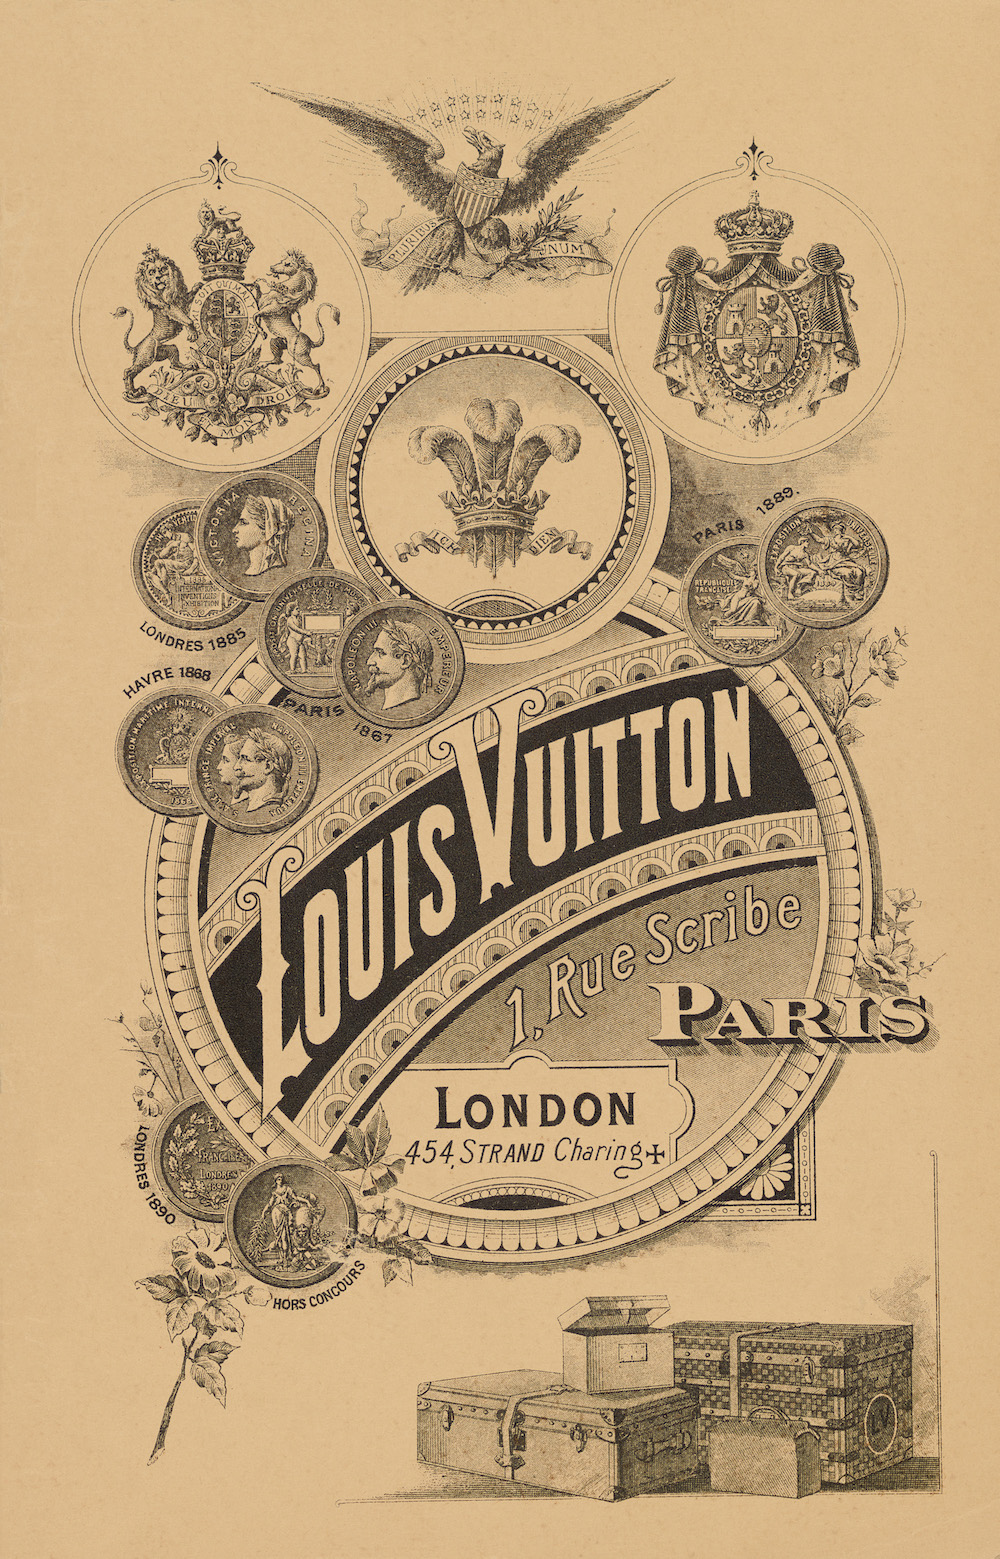 Louis Vuitton celebrates its bicentenary birthday with a global